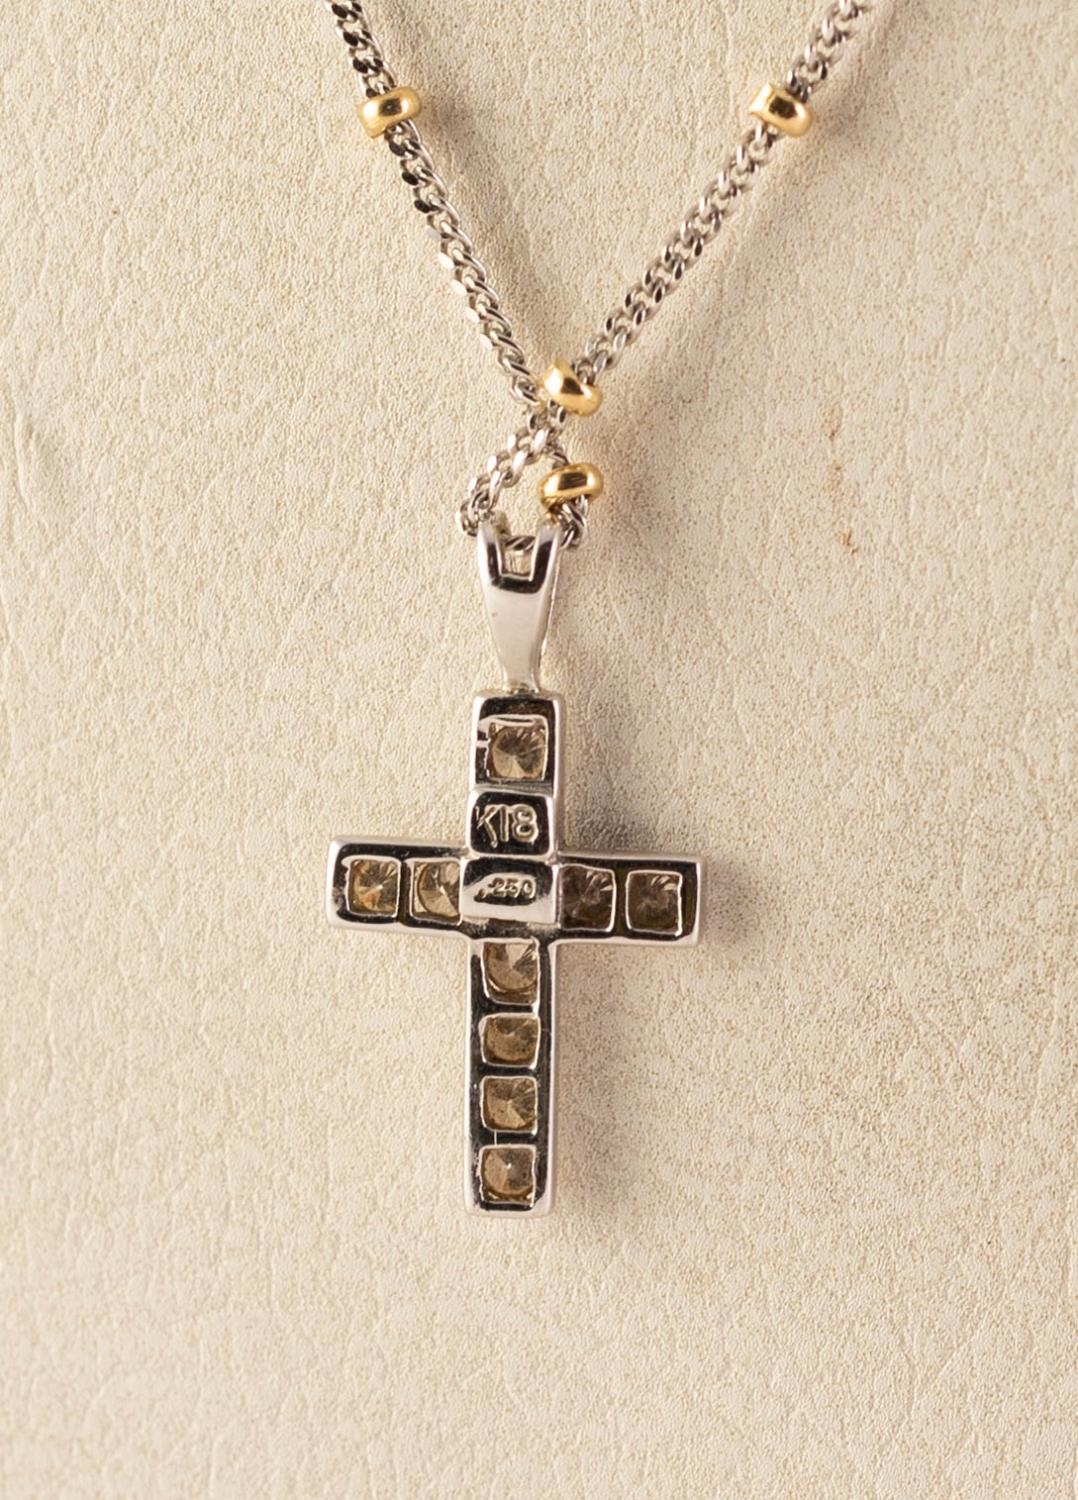 18ct WHITE GOLD TINY DIAMOND SET CRUCIFIX PENDANT on an 18ct WHTIE AND YELLOW GOLD FINE CHAIN - Image 3 of 3